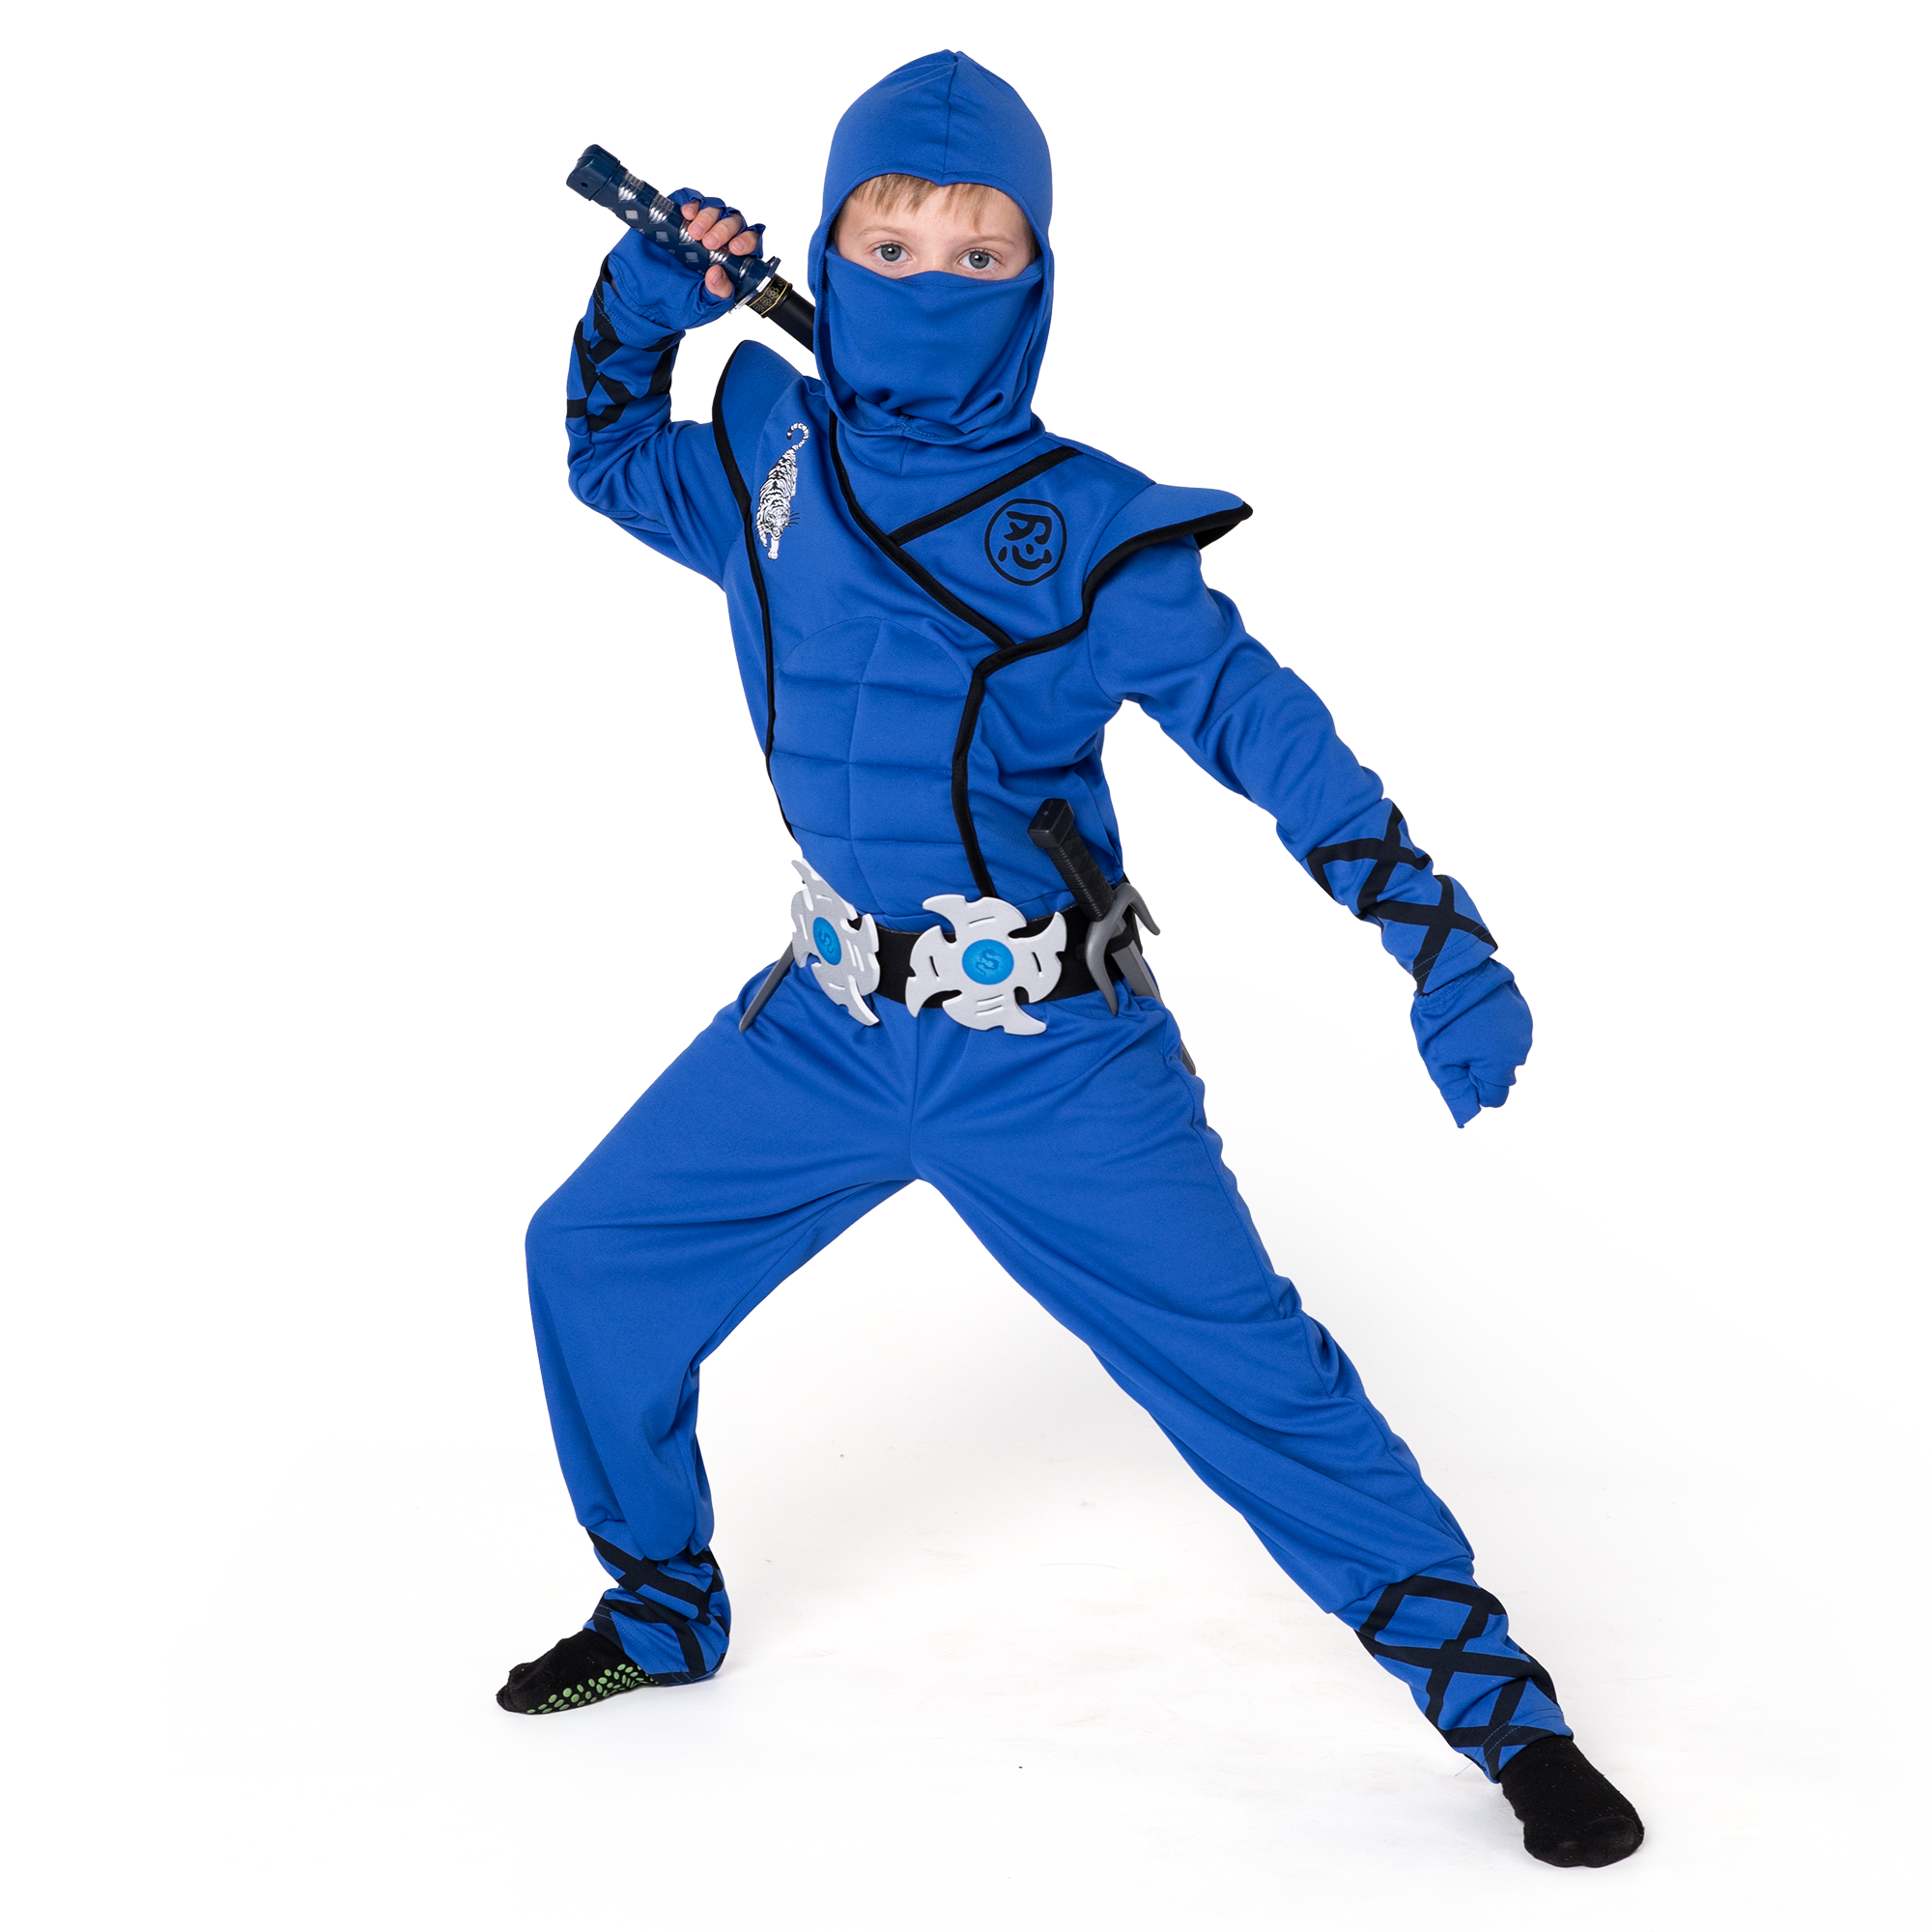 Syncfuns Kids Birdy Blue Ninja Costume with Accessories for Boys